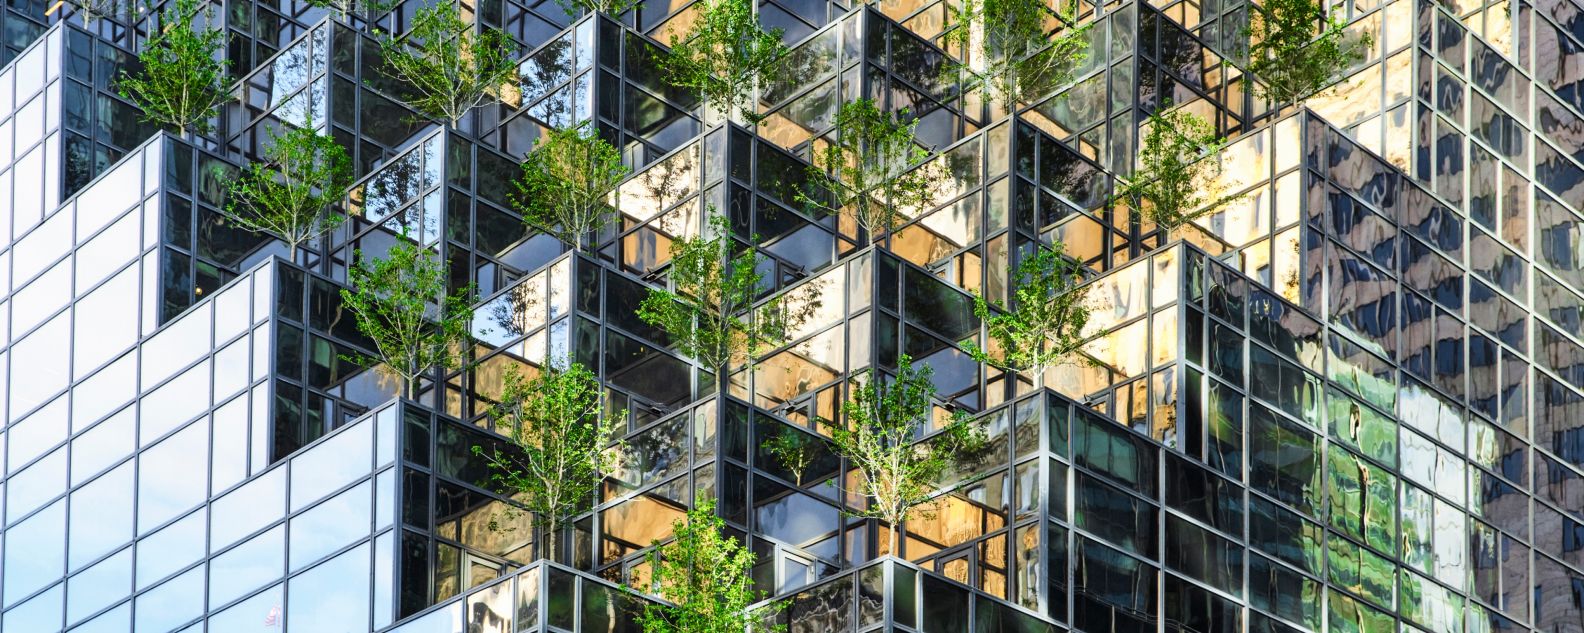 High angle view of a mirrored skyscraper with a modern trees installation on the facade